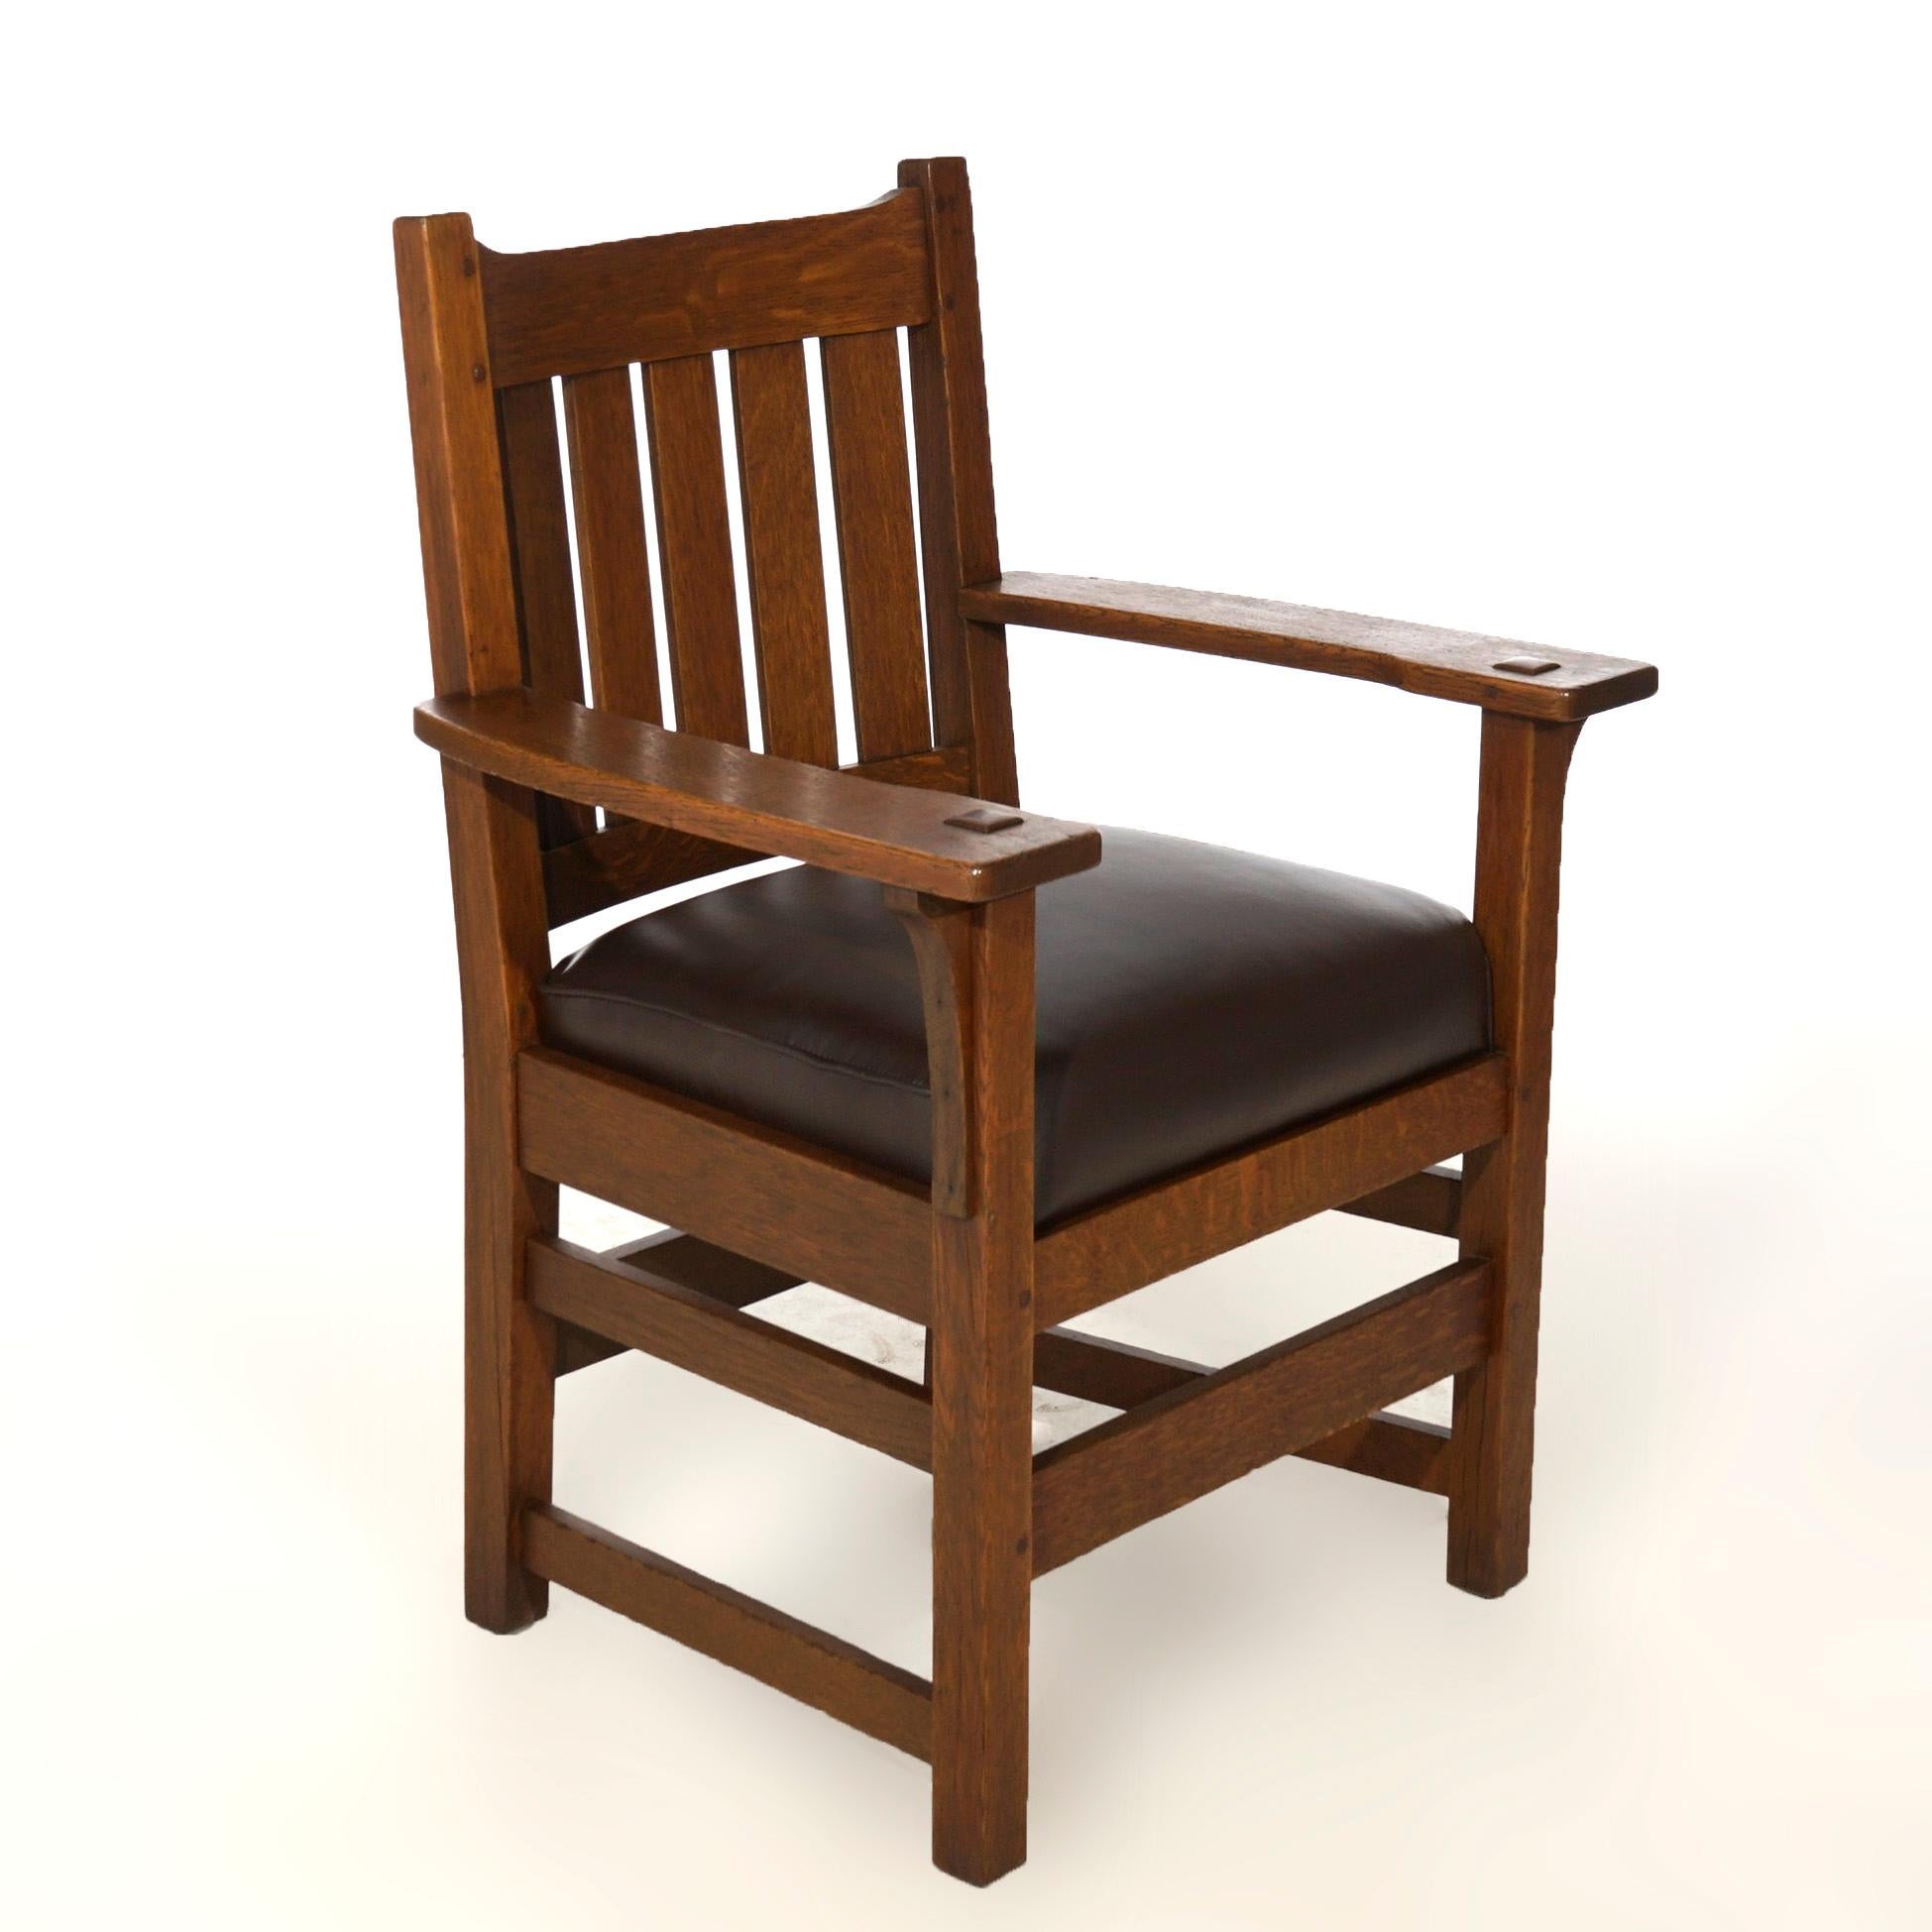 An antique Arts and Crafts arm chair by L & JG Stickley arm chair offers quarter sawn oak construction with slat back, maker label as photographed, c1910.

Measures- 36.5''H x 27''W x 22''D.

*Ask about DISCOUNTED DELIVERY rates within 1,500 miles